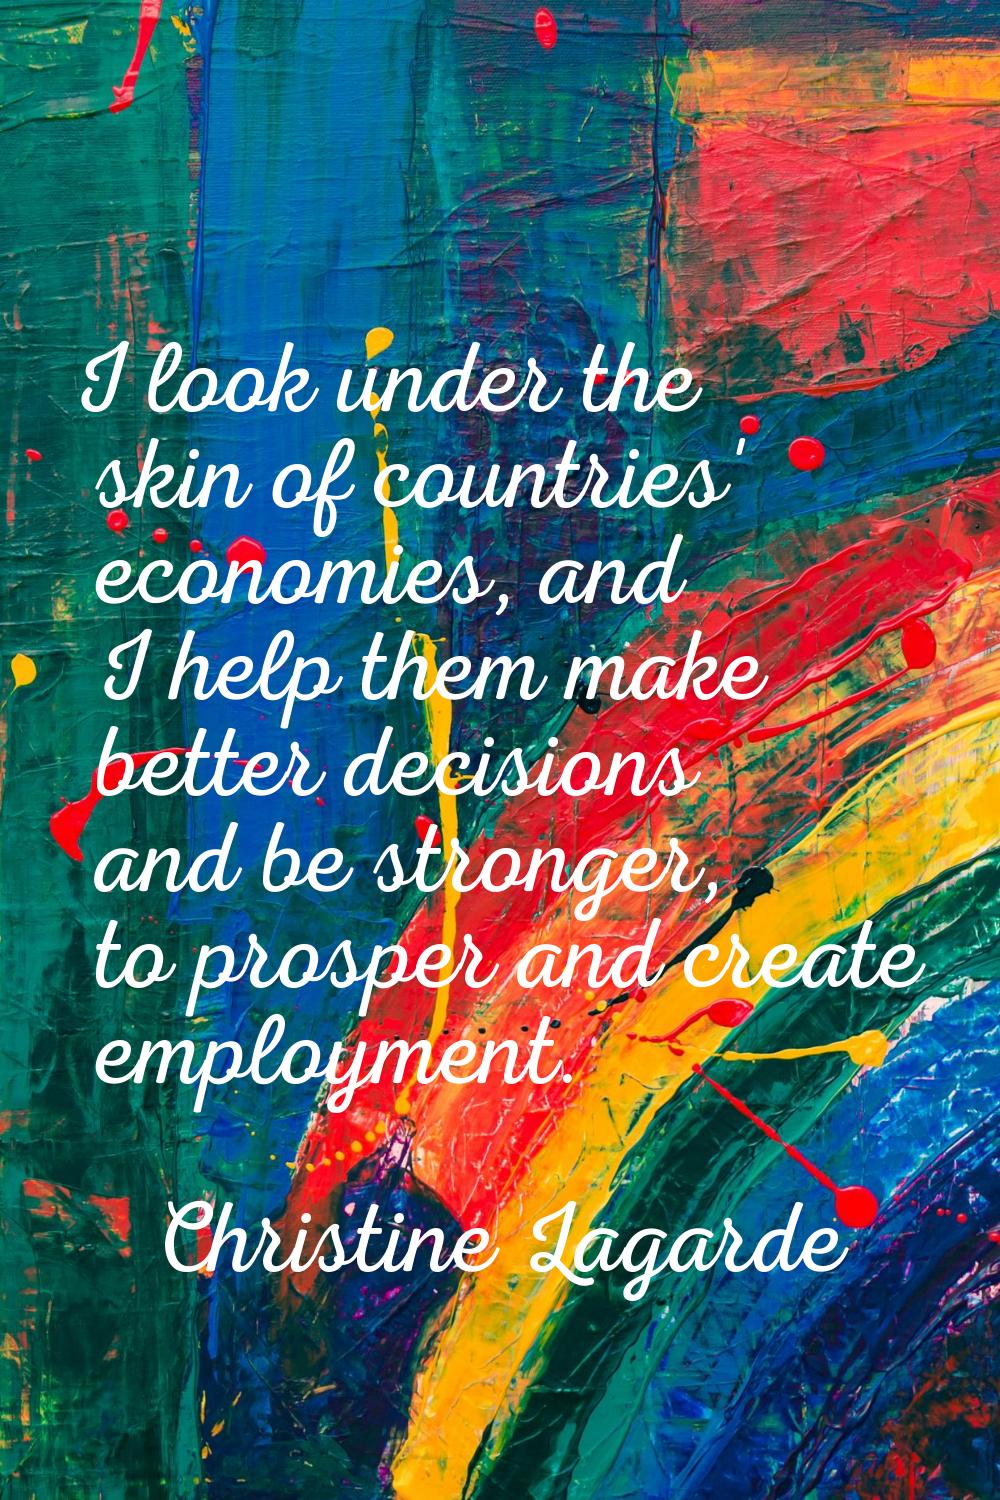 I look under the skin of countries' economies, and I help them make better decisions and be stronge